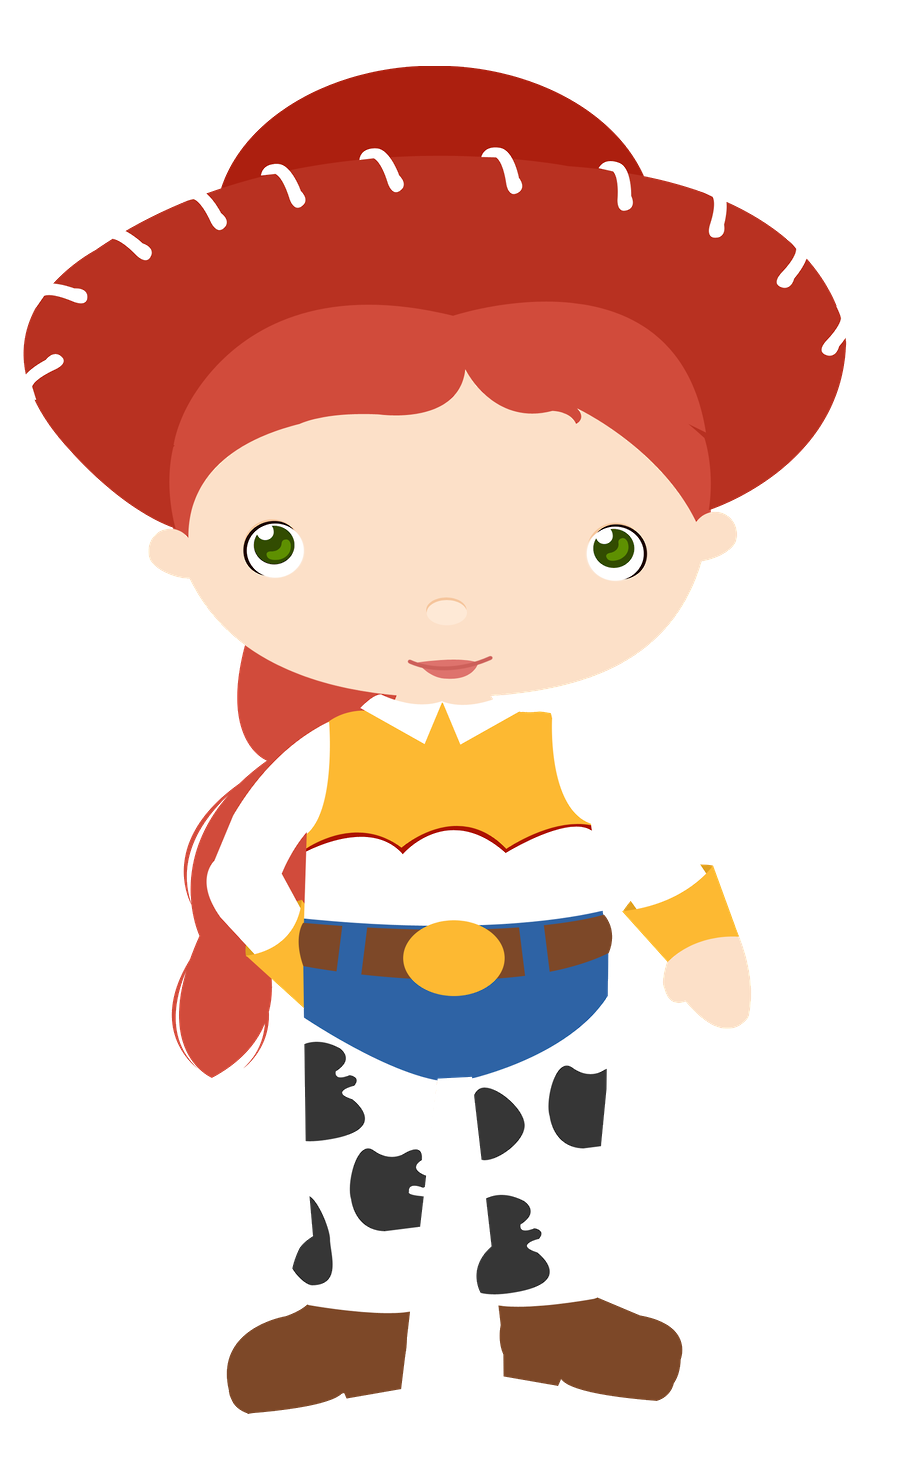 toys story clipart - photo #12